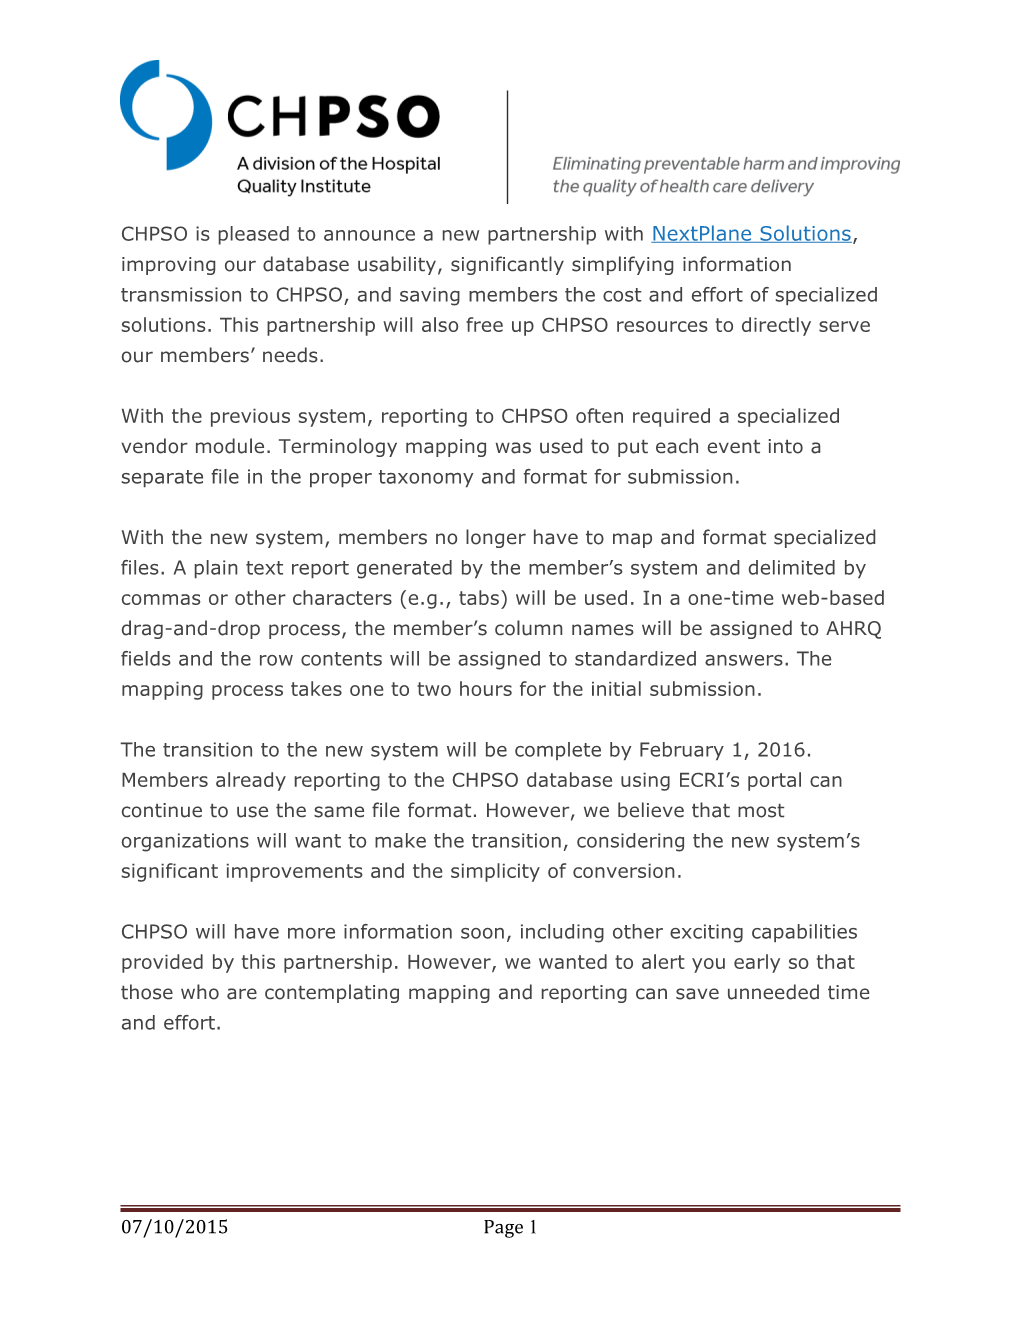 CHPSO Is Pleased to Announce a New Partnership with Nextplane Solutions, Improving Our